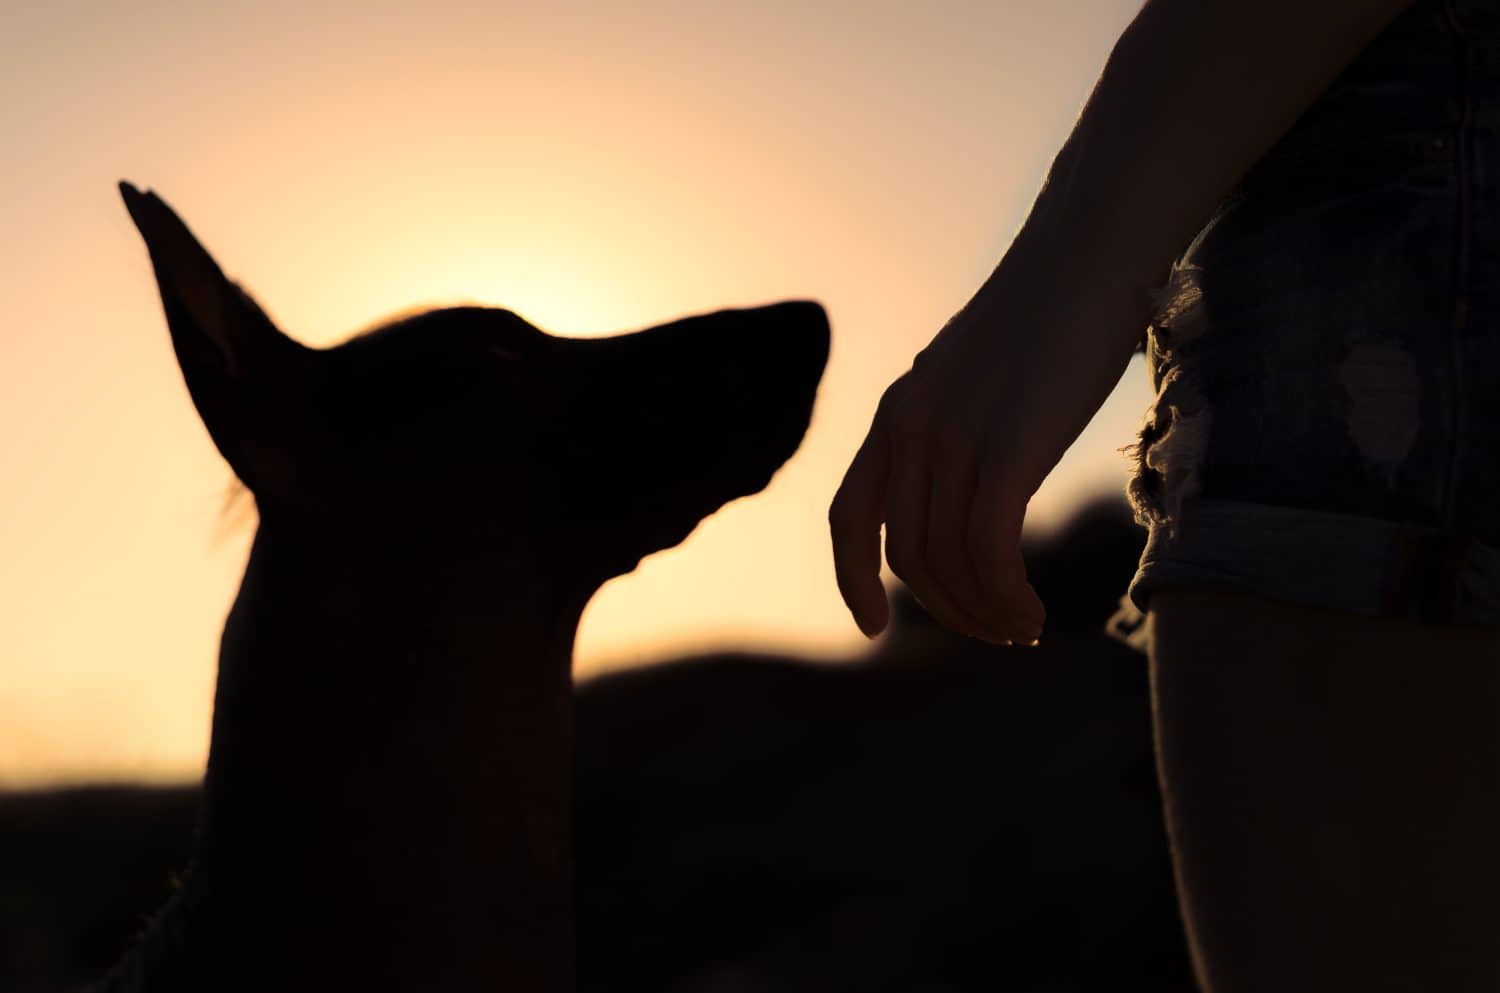 Girl and her dog on a walk, silhouetted against the sunsetting sky